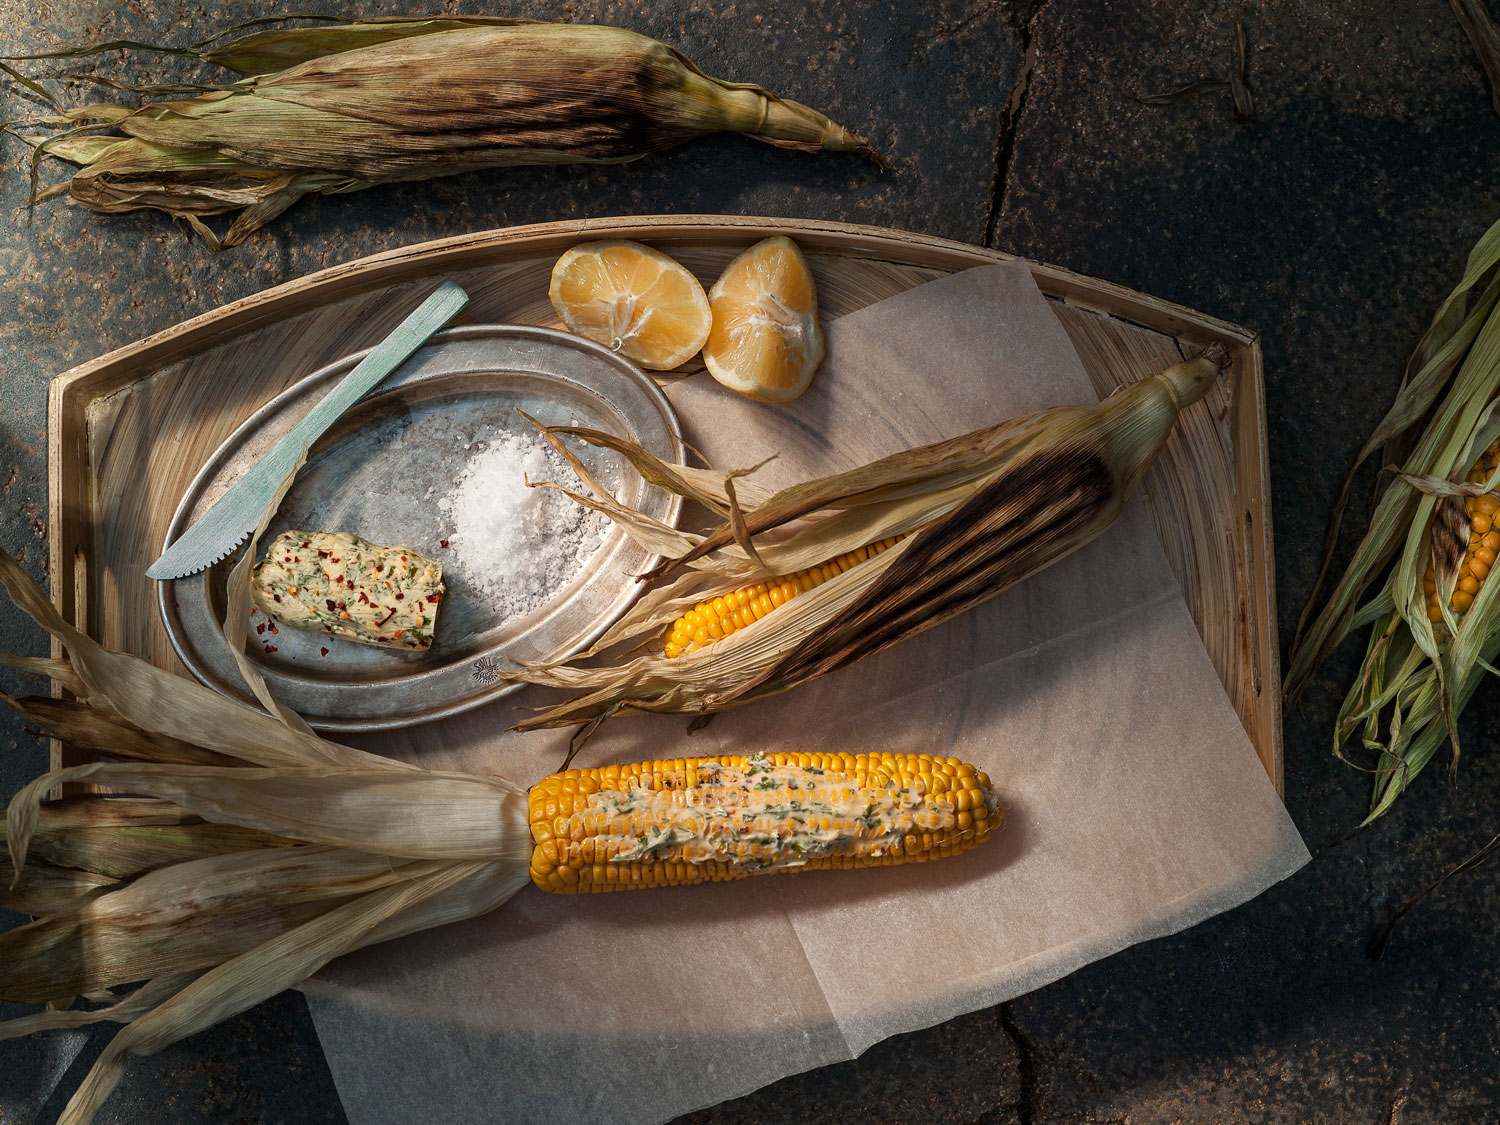  Grilled corn with spicy butter  © Stavros Kostakis &amp; Panagiota Liakopoulou 